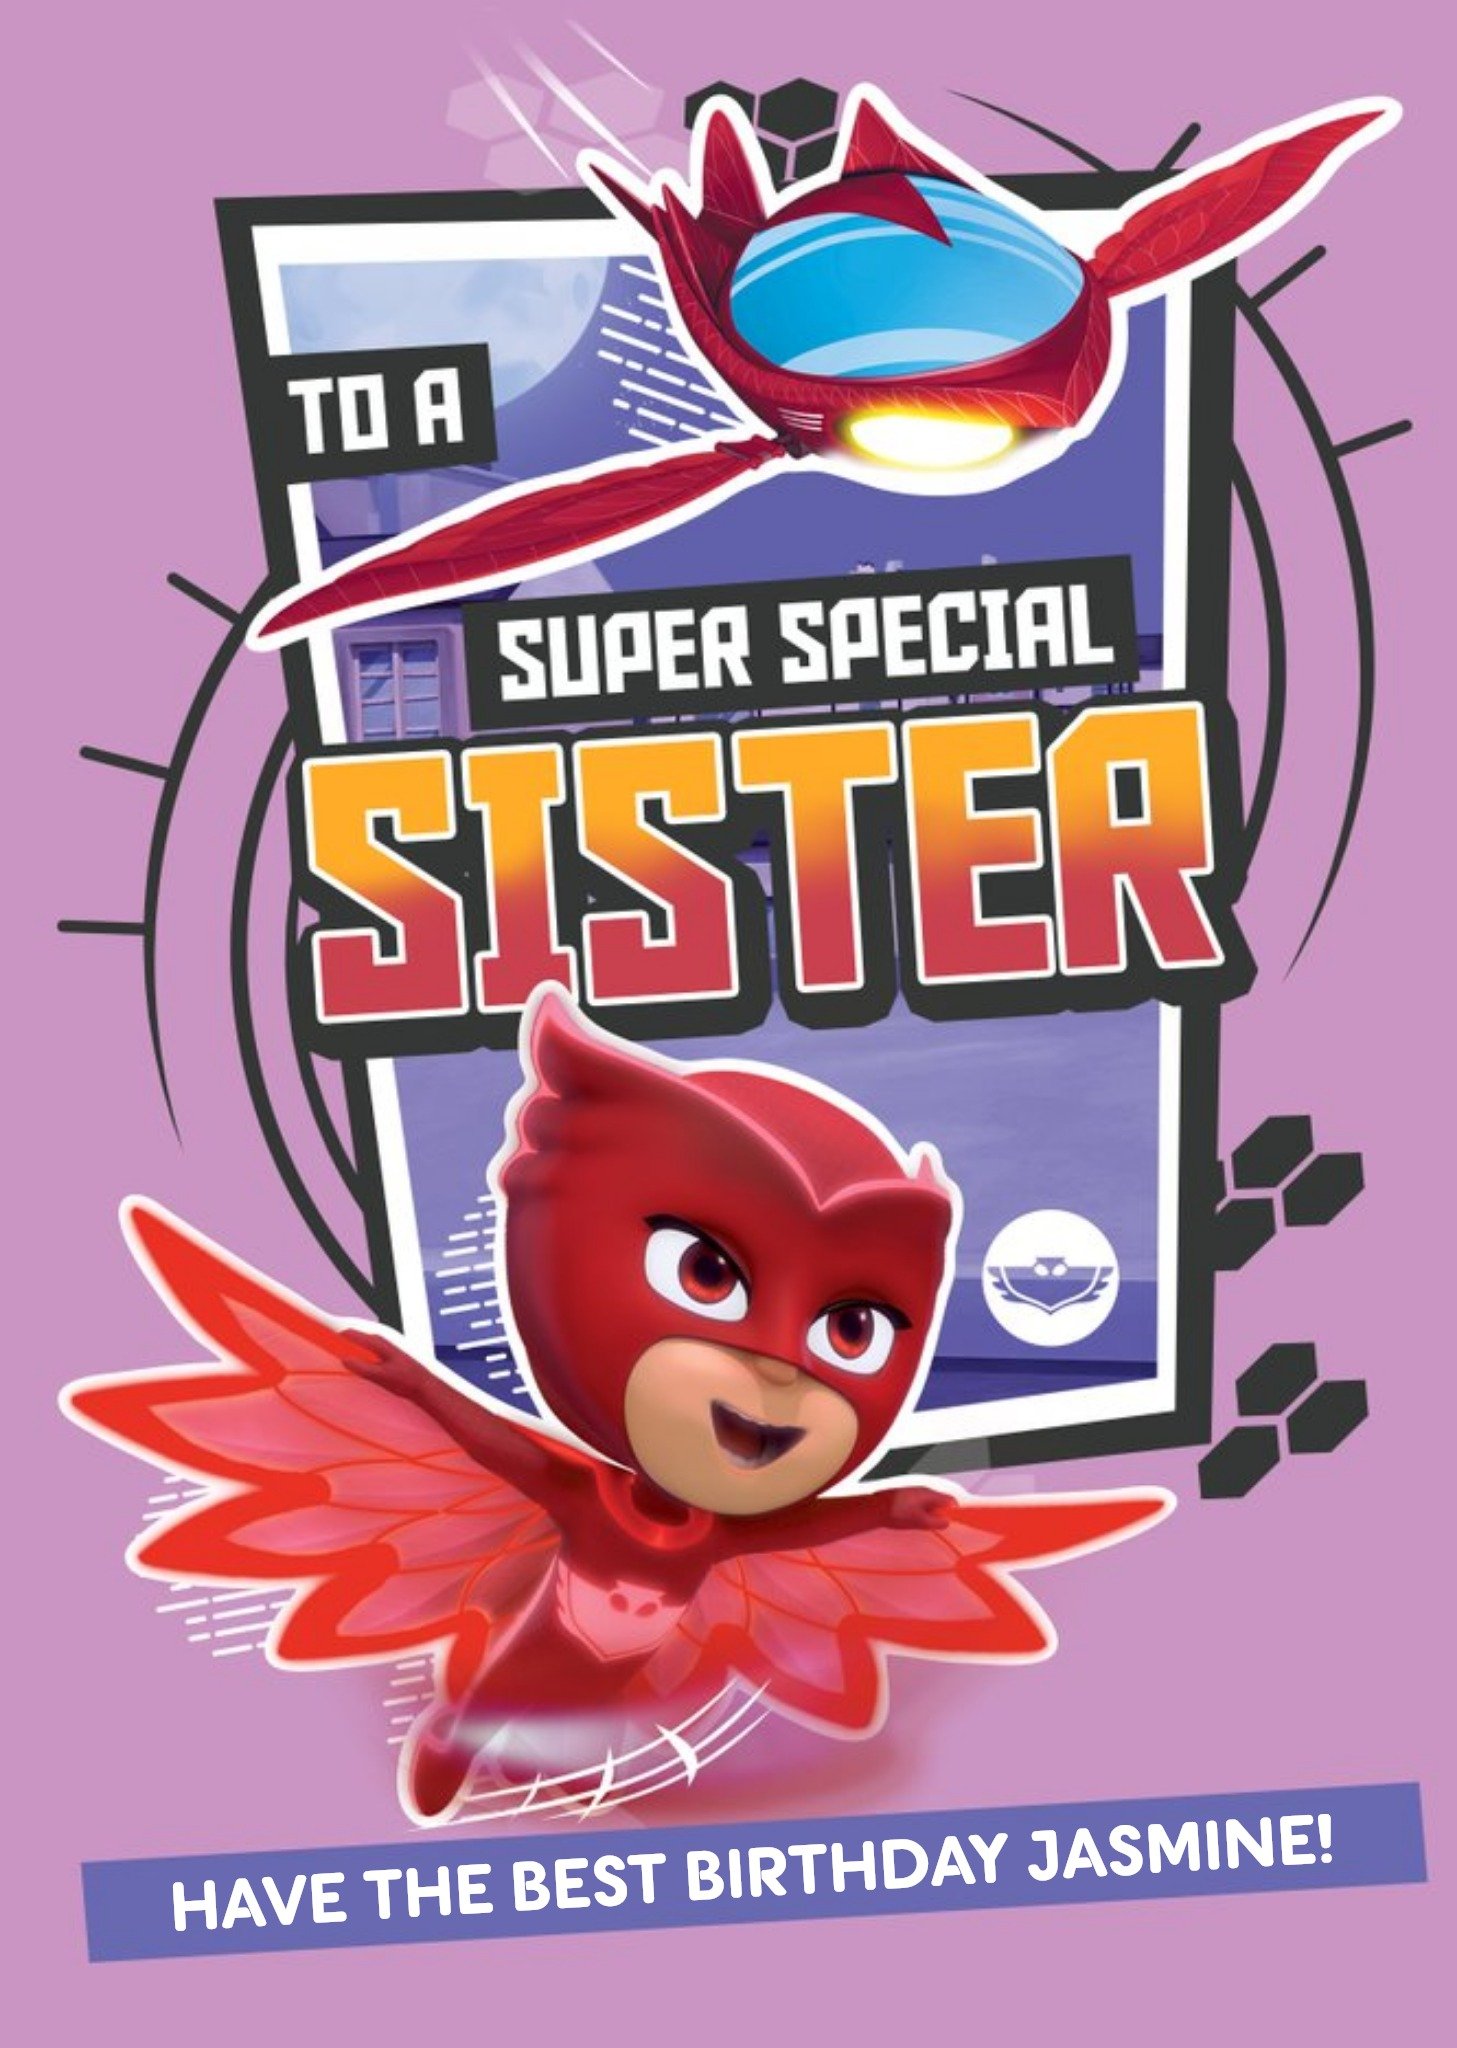 Pj Masks Owlette To A Super Special Sister Birthday Card, Large